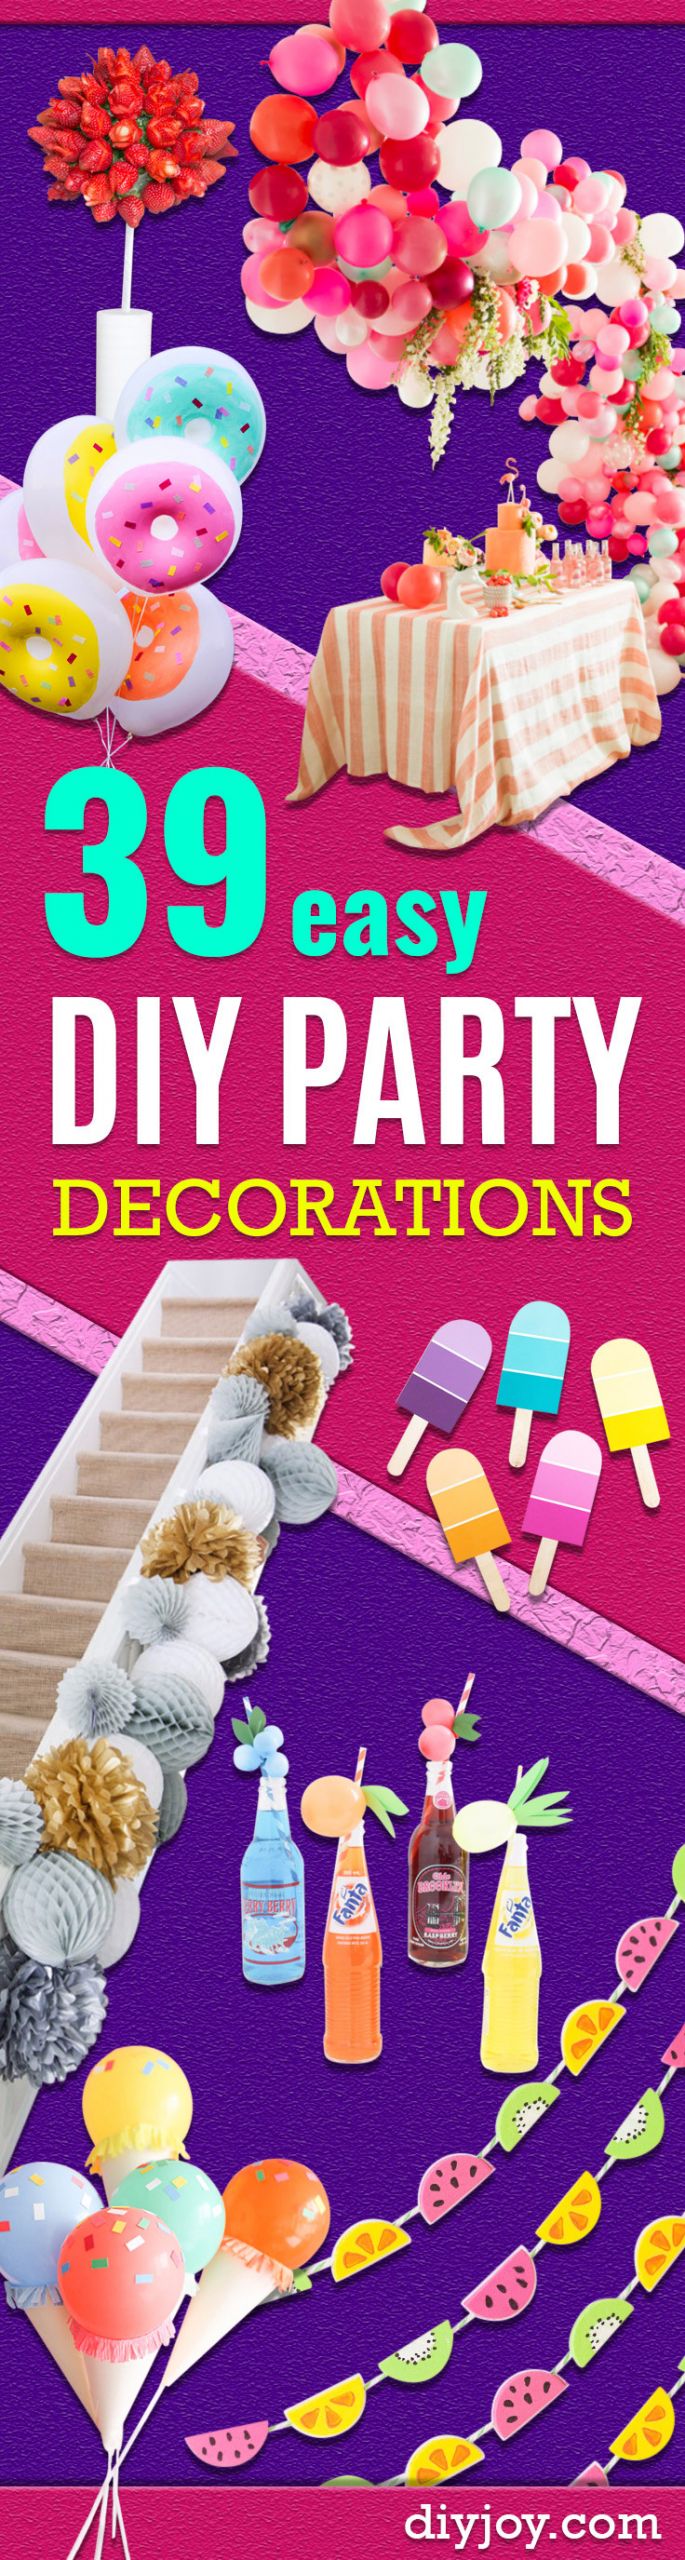 Cheap Birthday Decorations
 39 Easy DIY Party Decorations